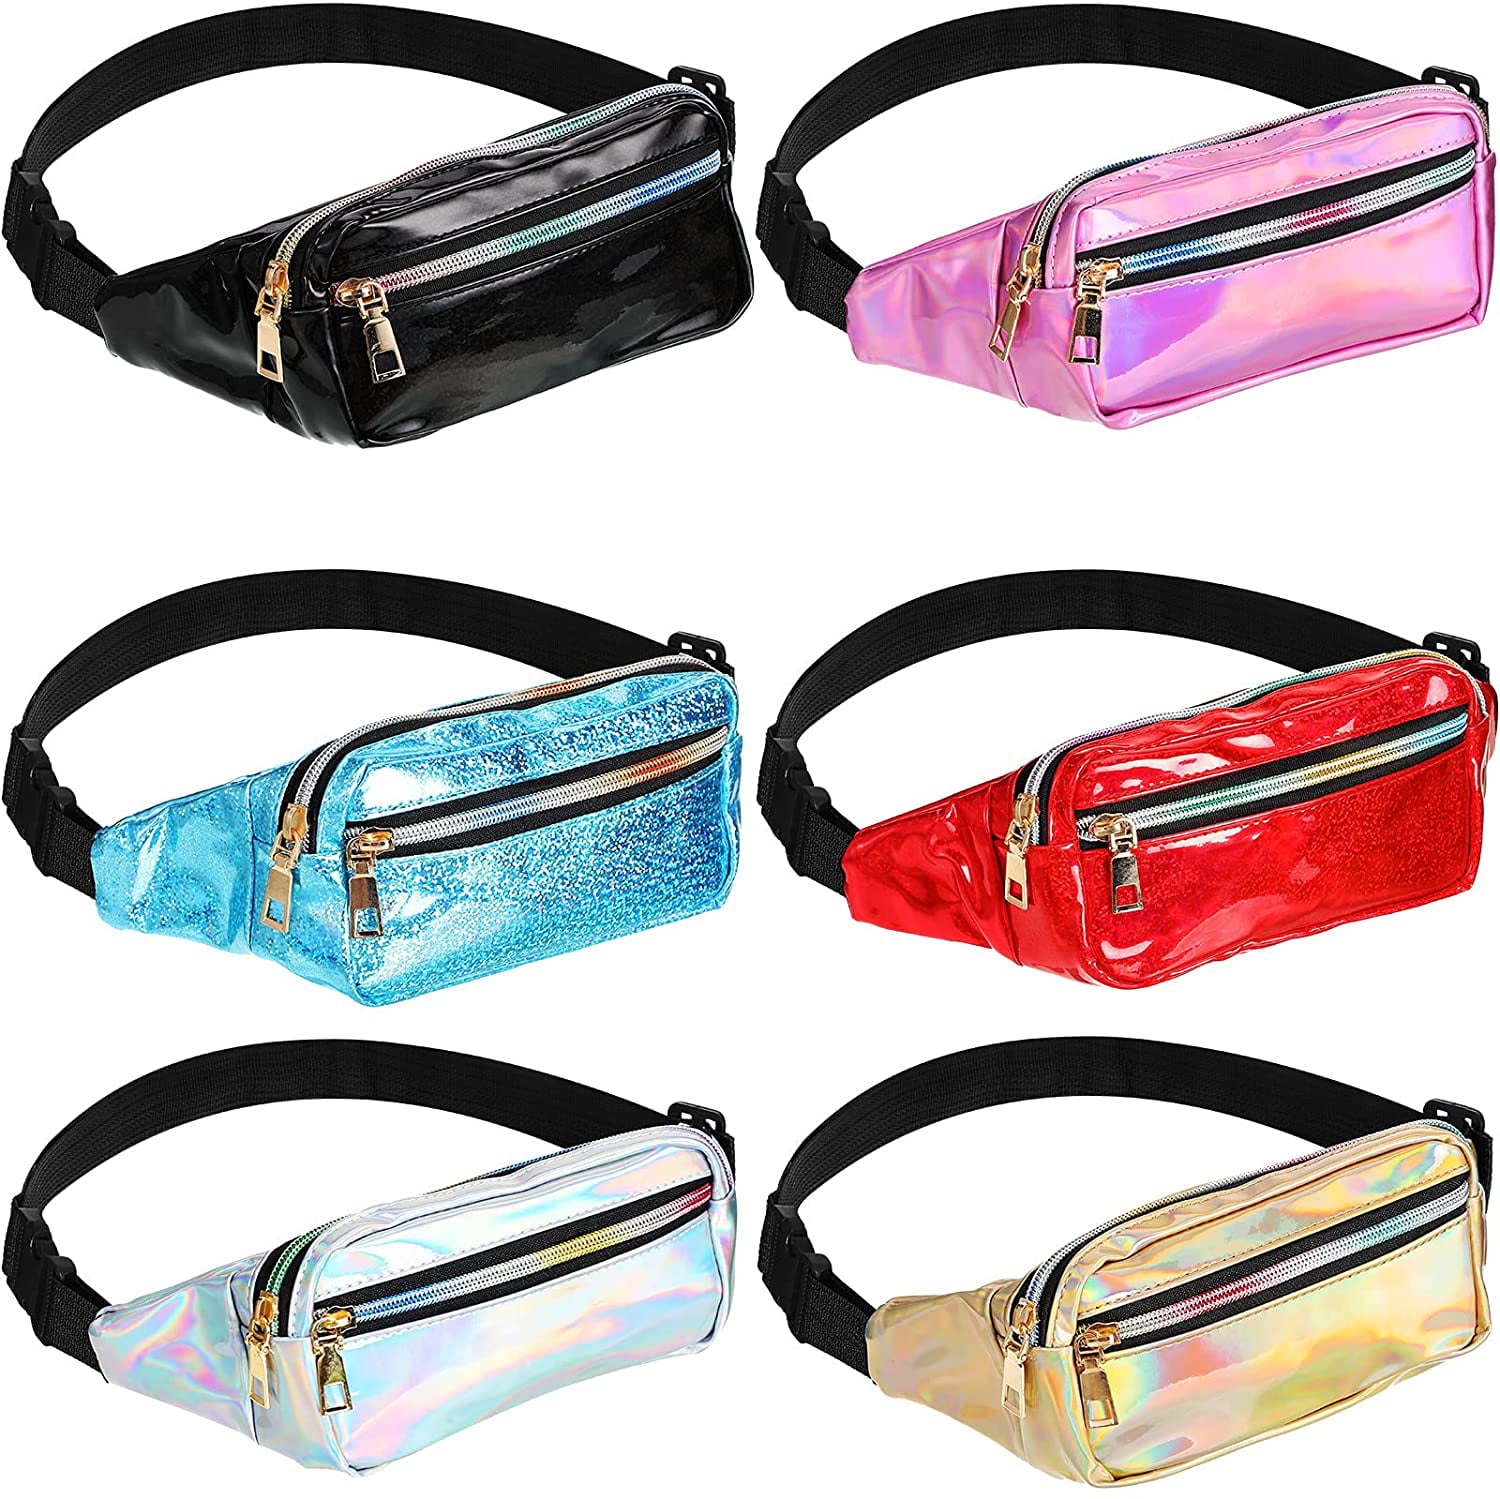 2 Pieces Fanny Pack Shiny Holographic Waist Bags Waterproof Neon Fanny Packs for Women Festival Party Travel Rave Hiking Outdoor Activities Silver, Rose Gold 